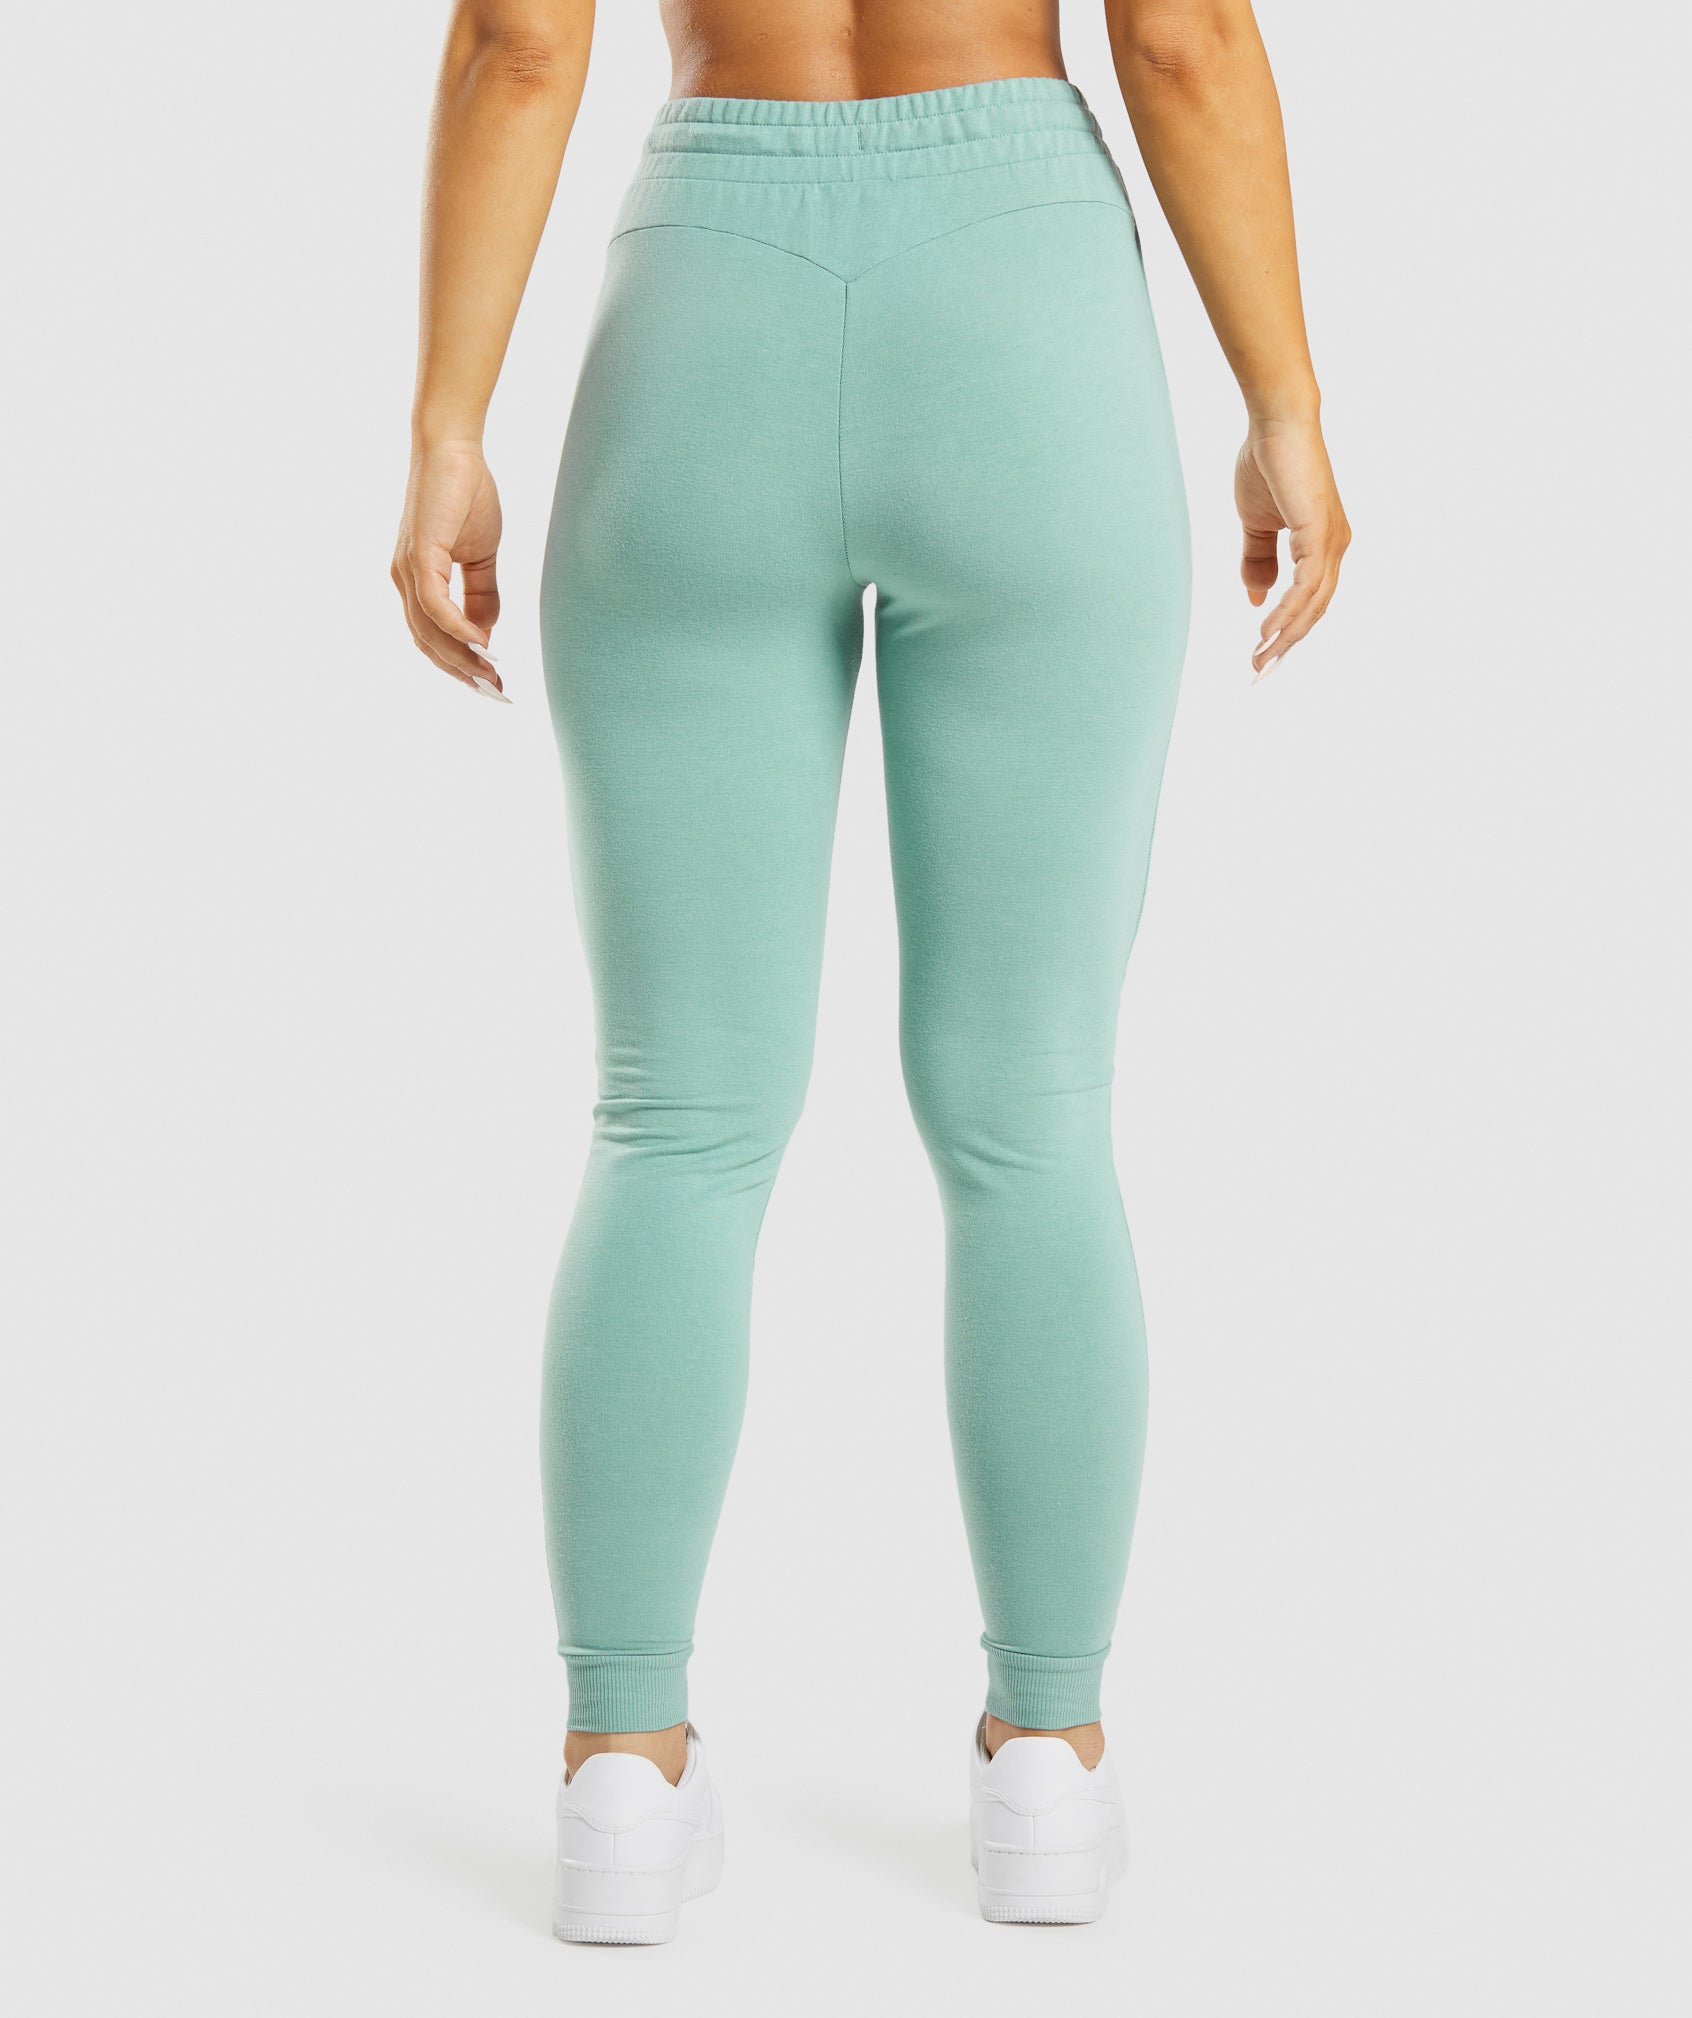 Gymshark Pippa Black High Waist White Logo Relaxed Fit Athletic Joggers  Medium M - $30 (14% Off Retail) - From maddie